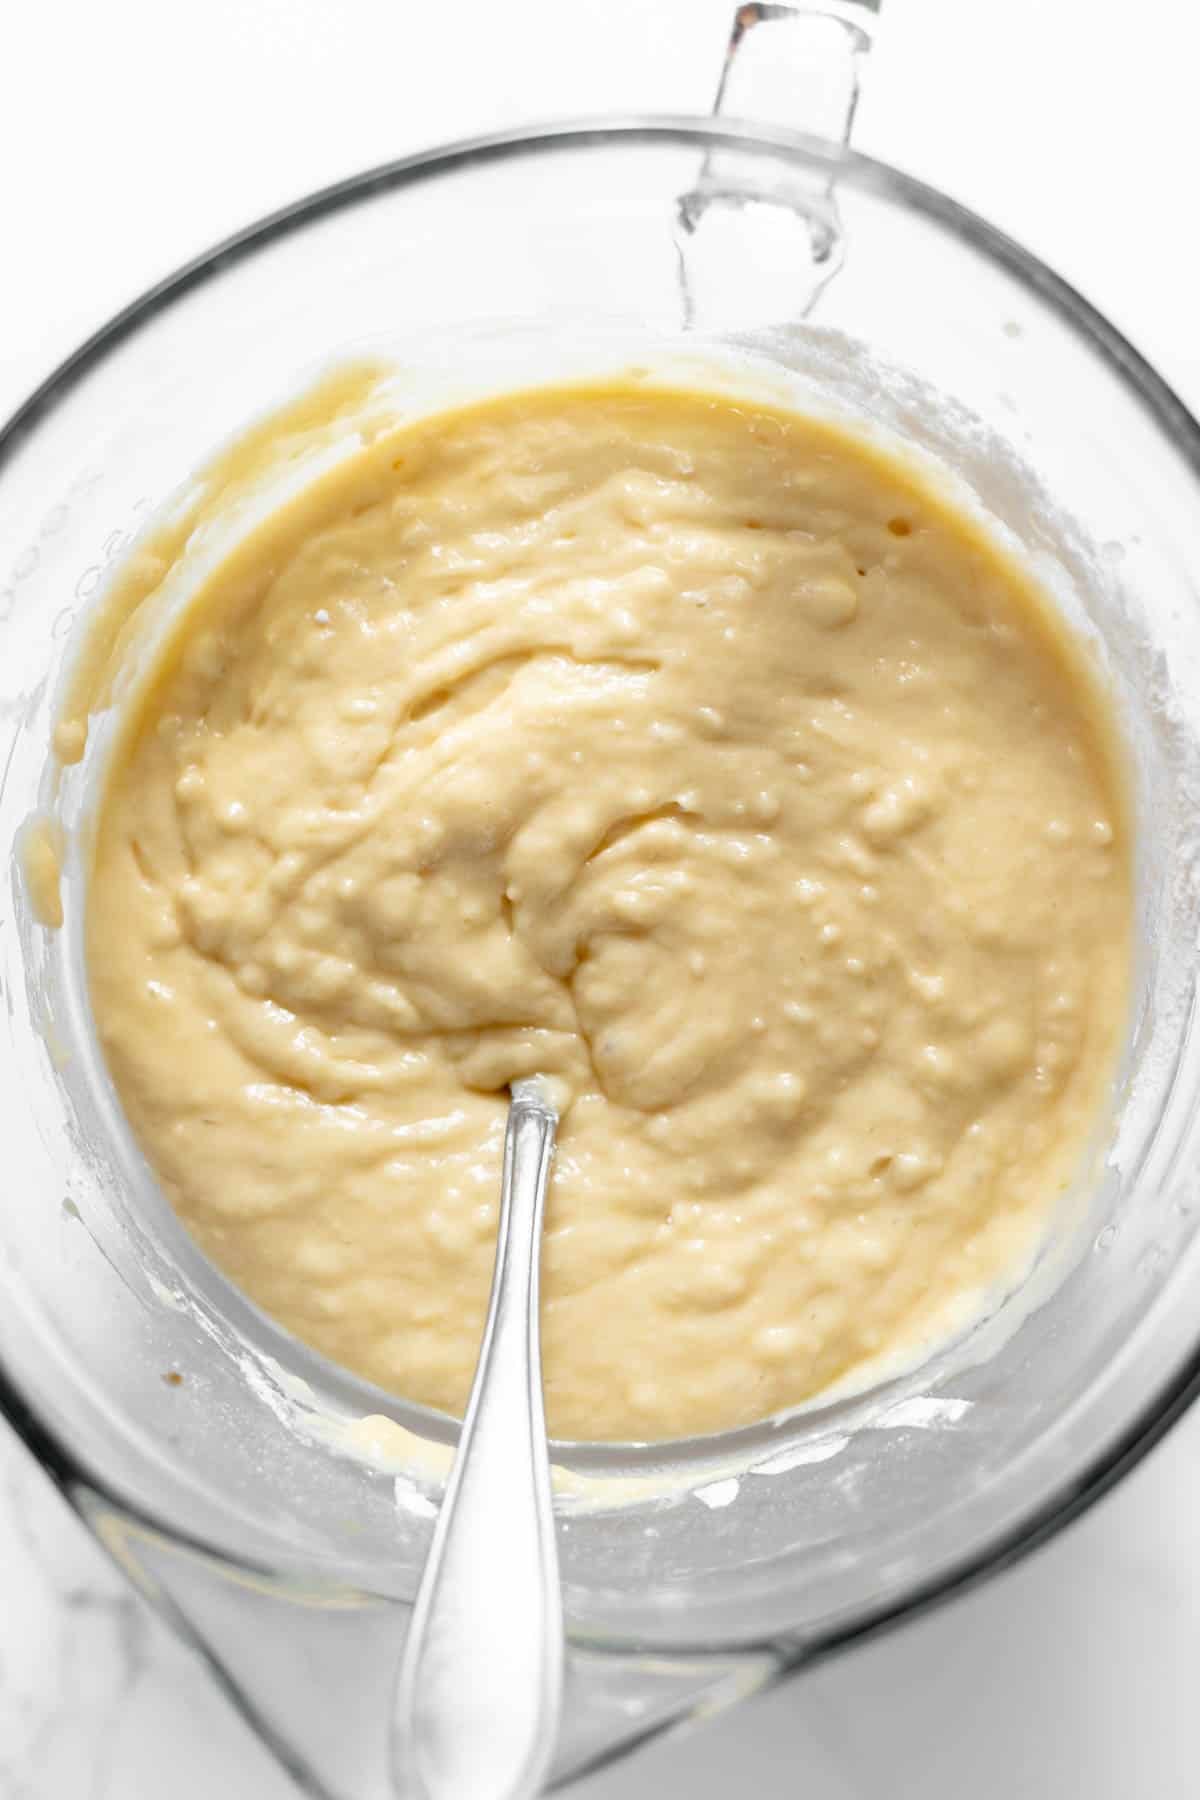 Plain muffin batter in a bowl.